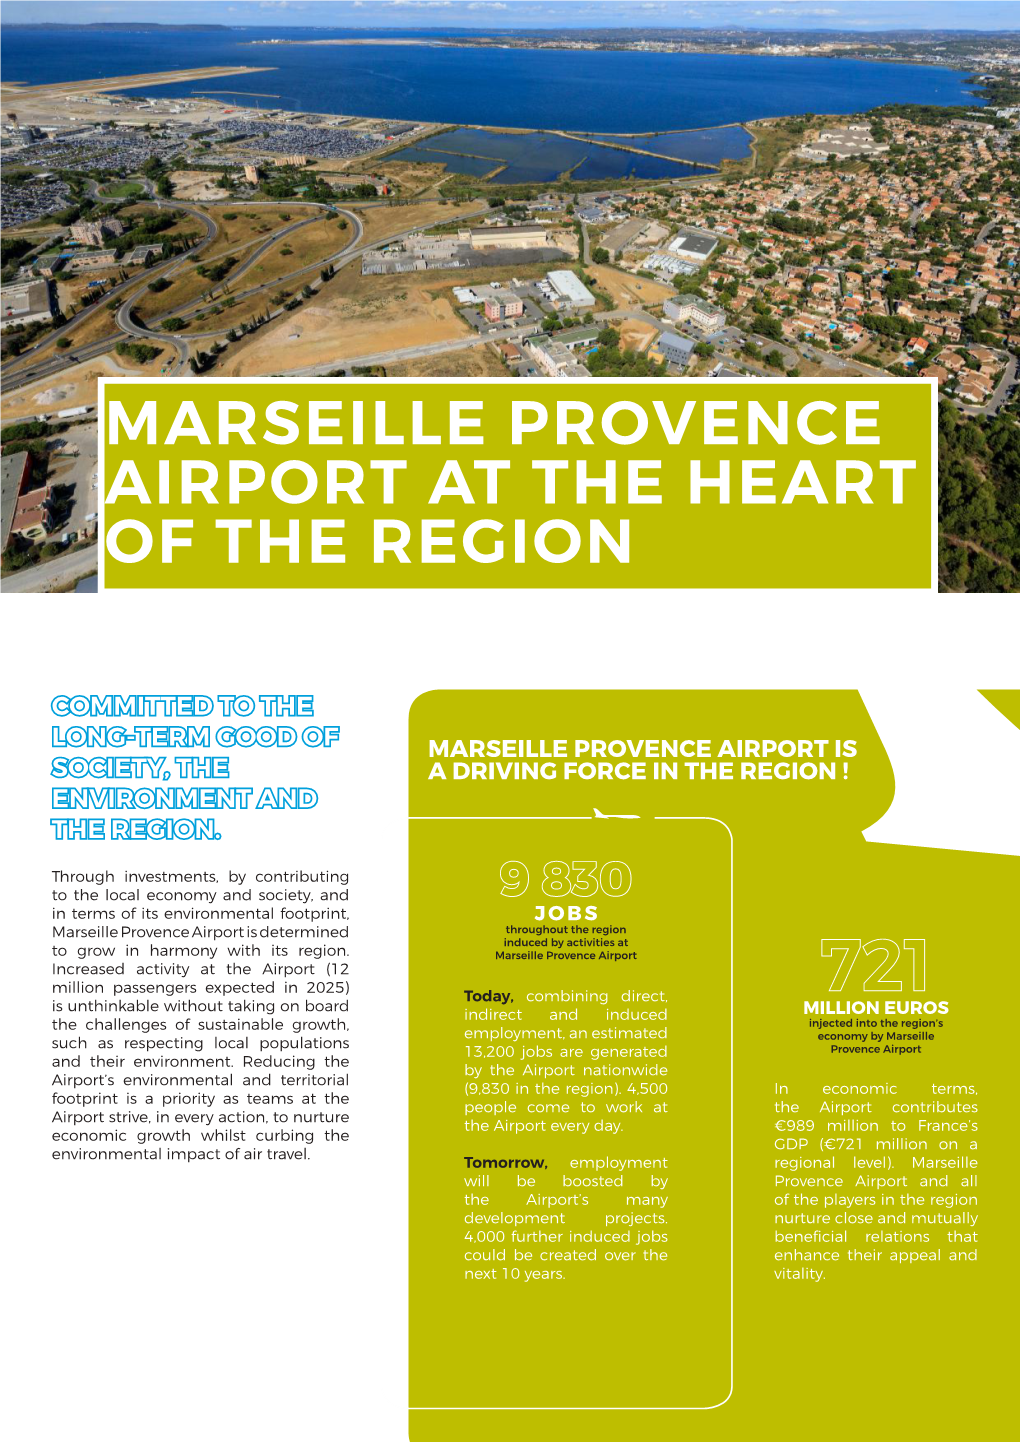 Marseille Provence Airport at the Heart of the Region